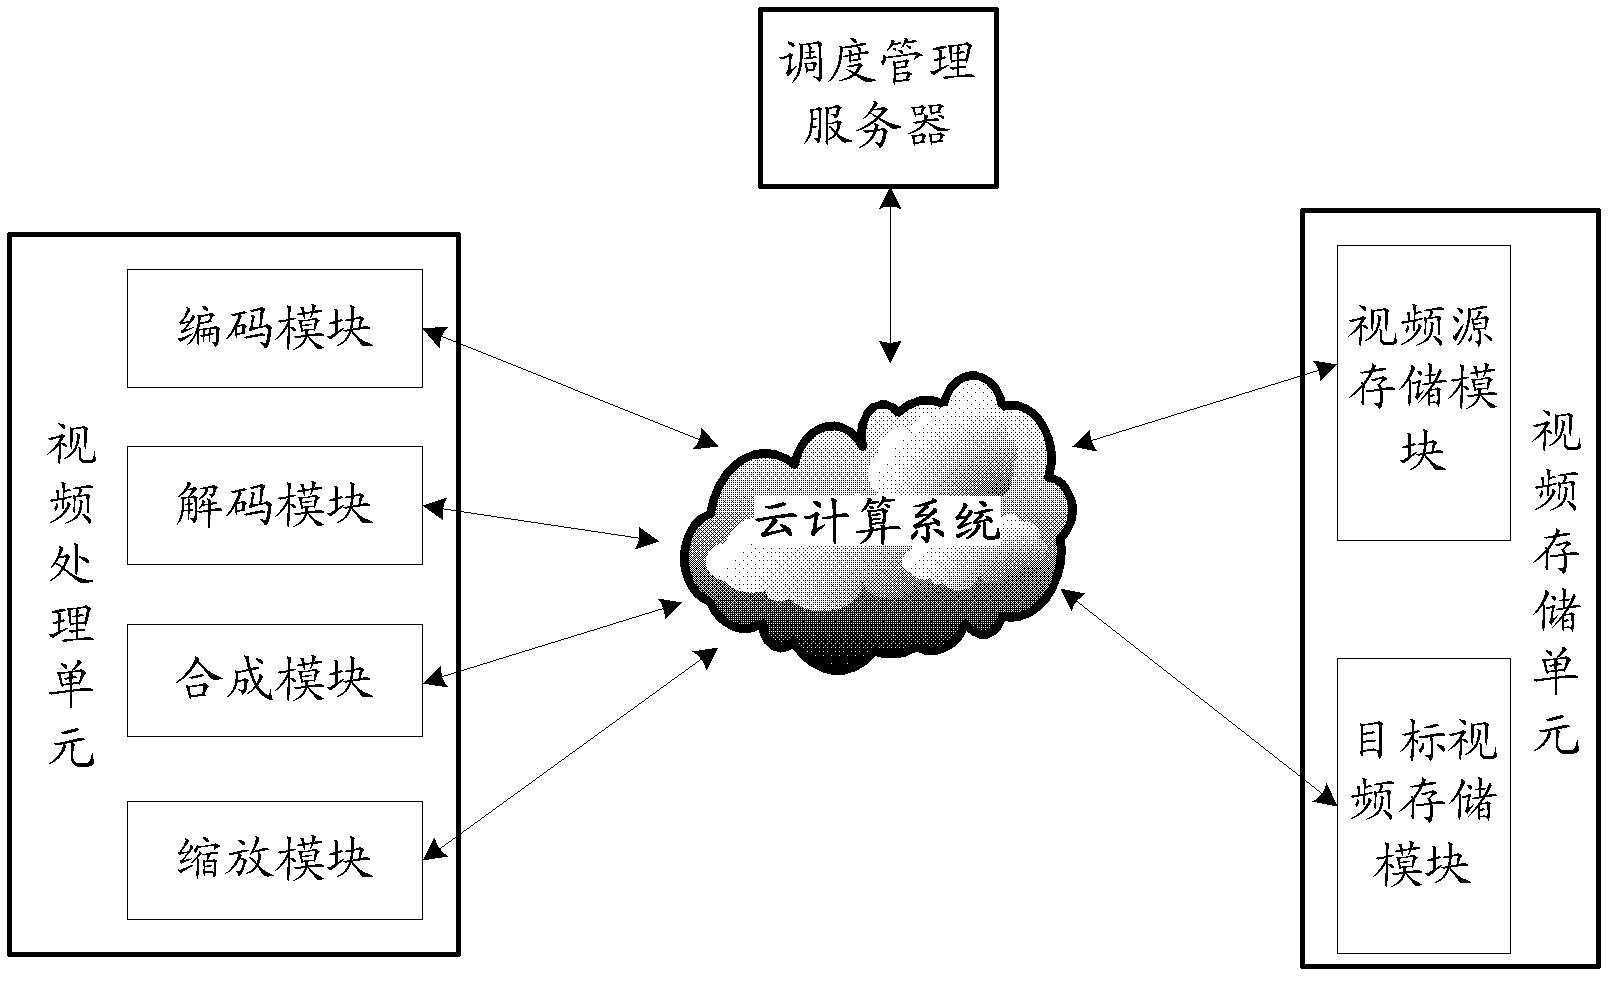 Video processing system based on cloud computing